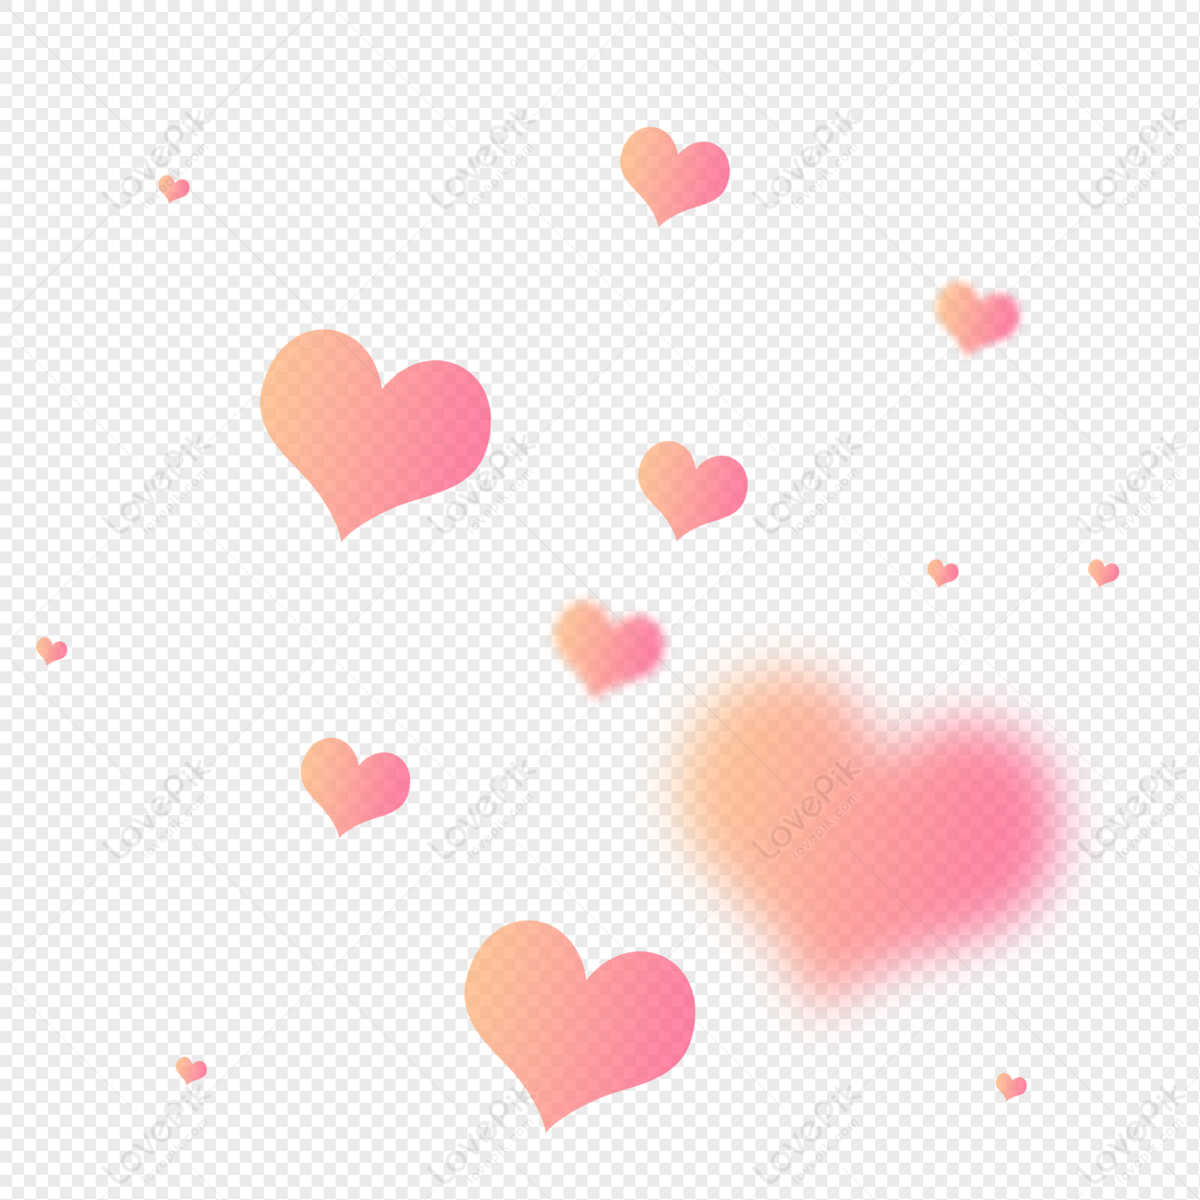 Cute Fairy Tale Love Floating Heart PNG Transparent Background And ...